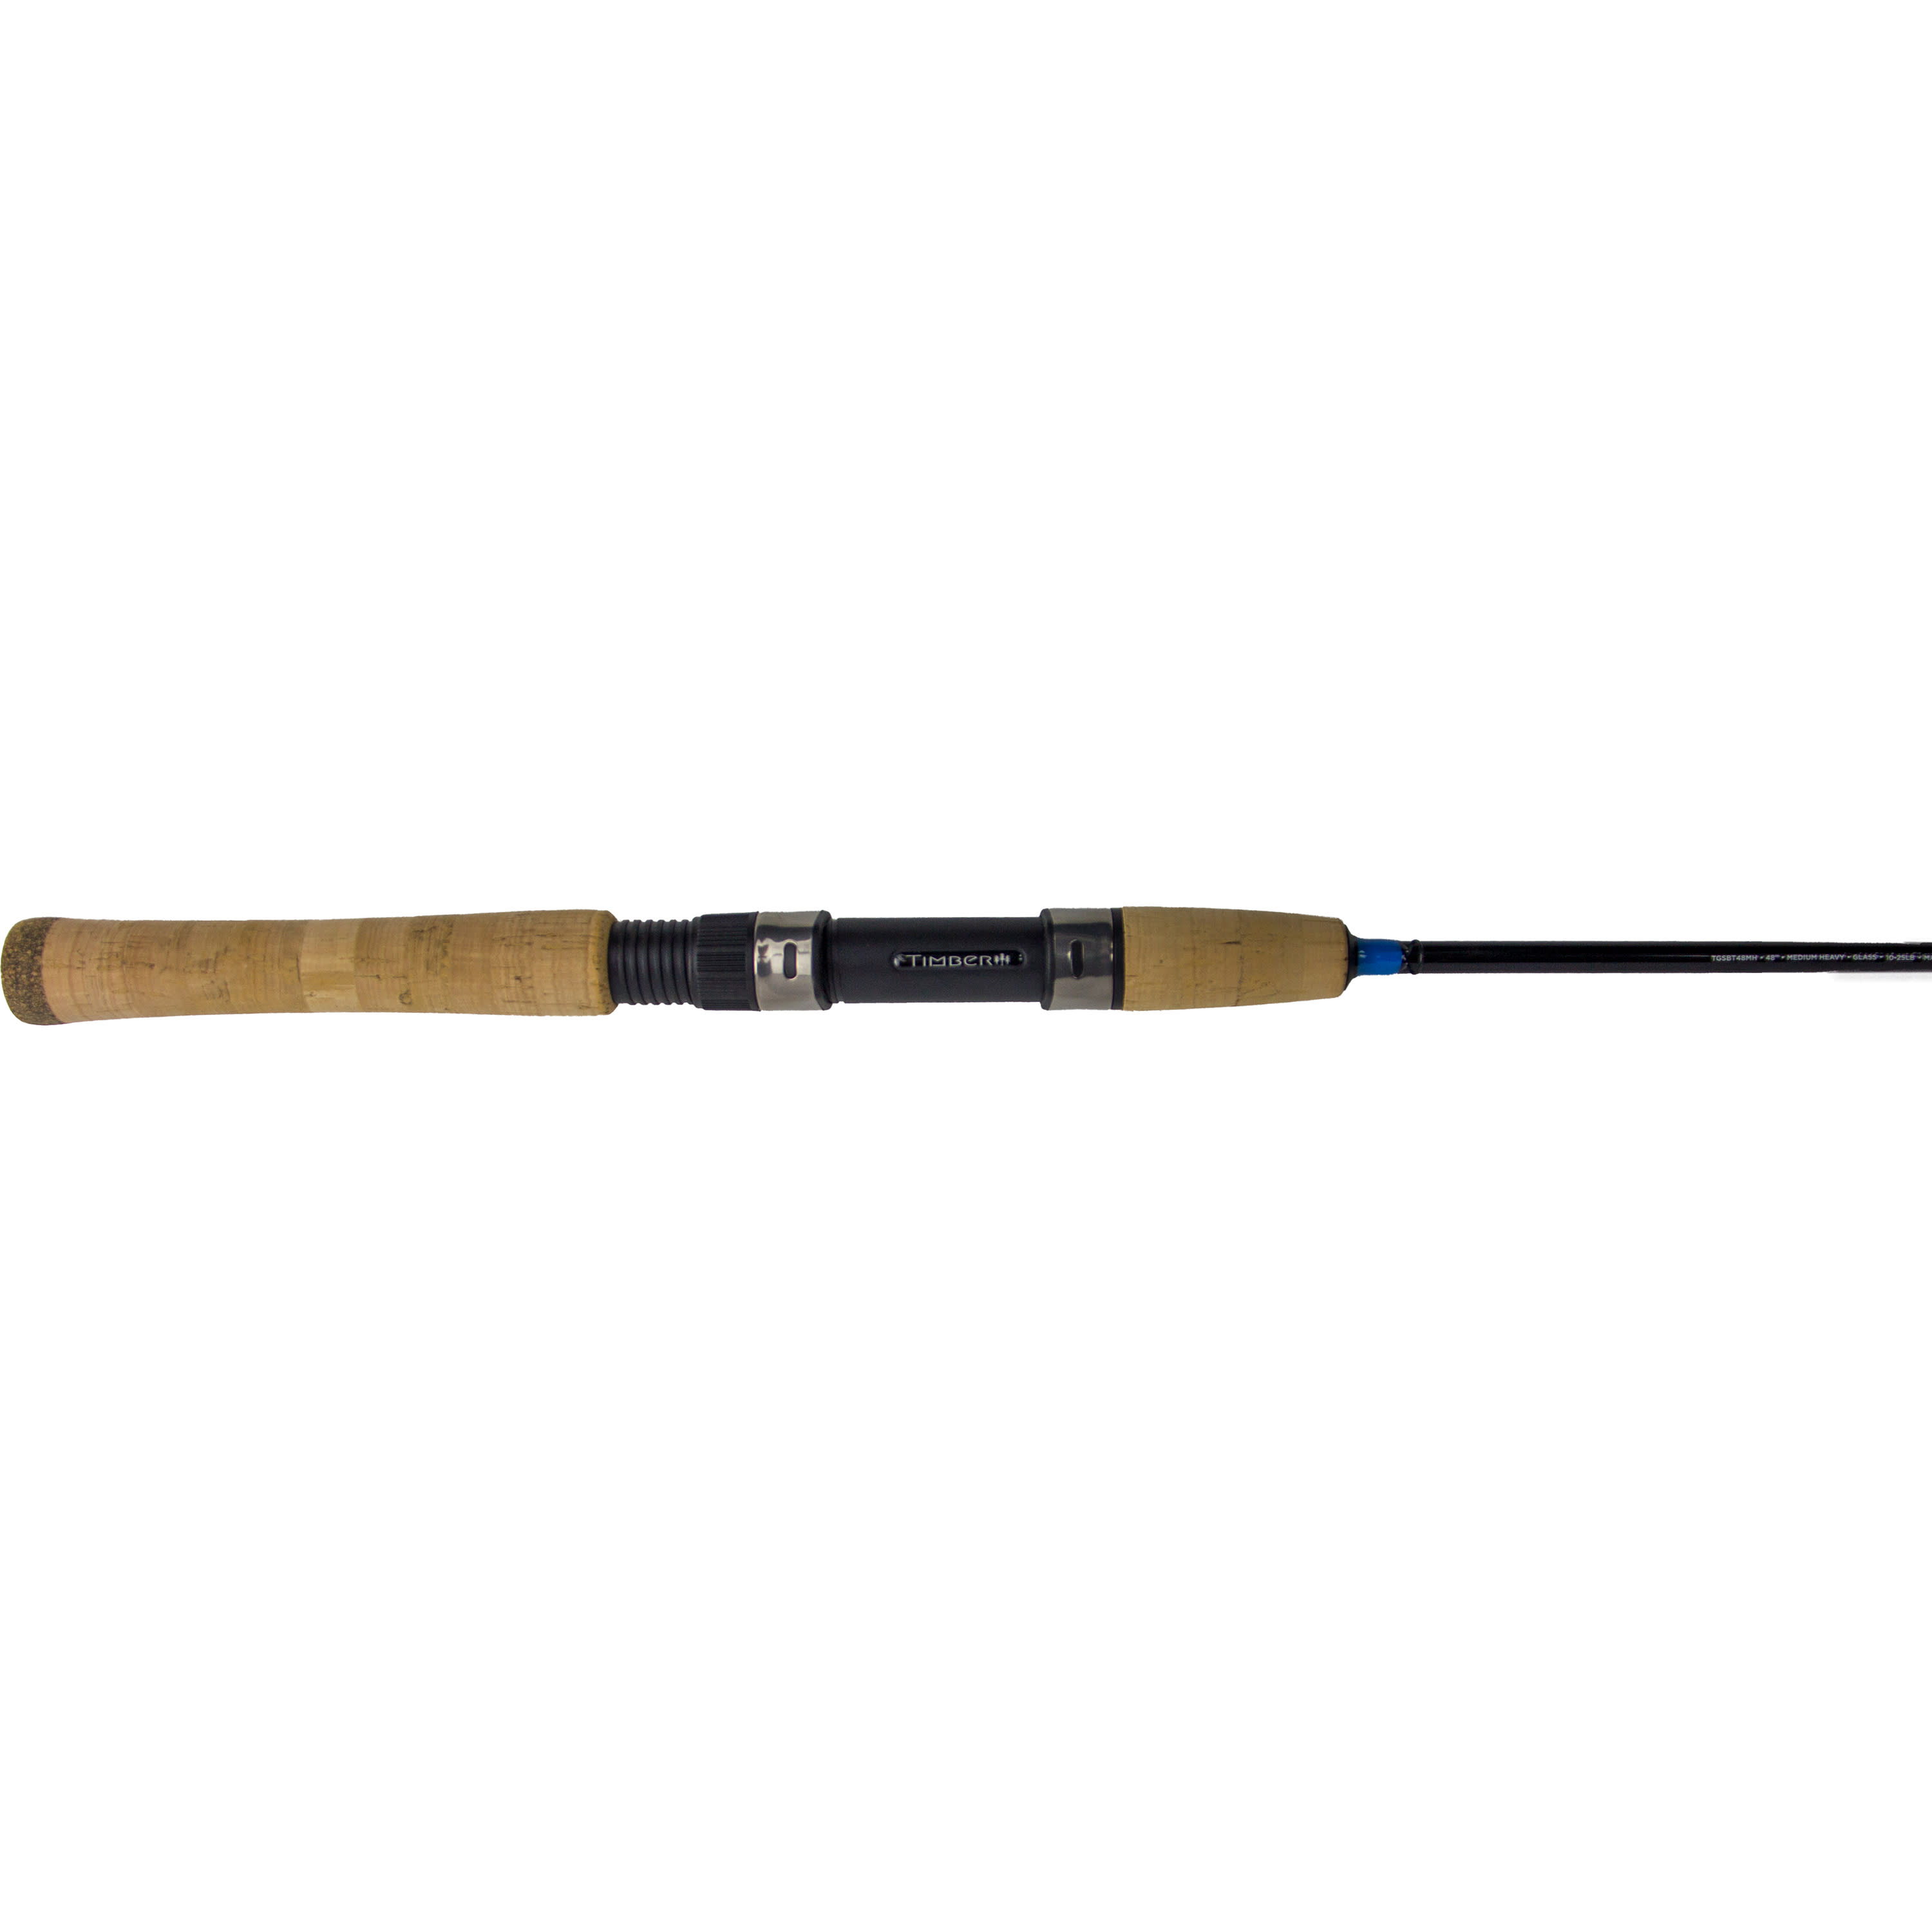 Timber Guide Series Big Ticket Ice Rod